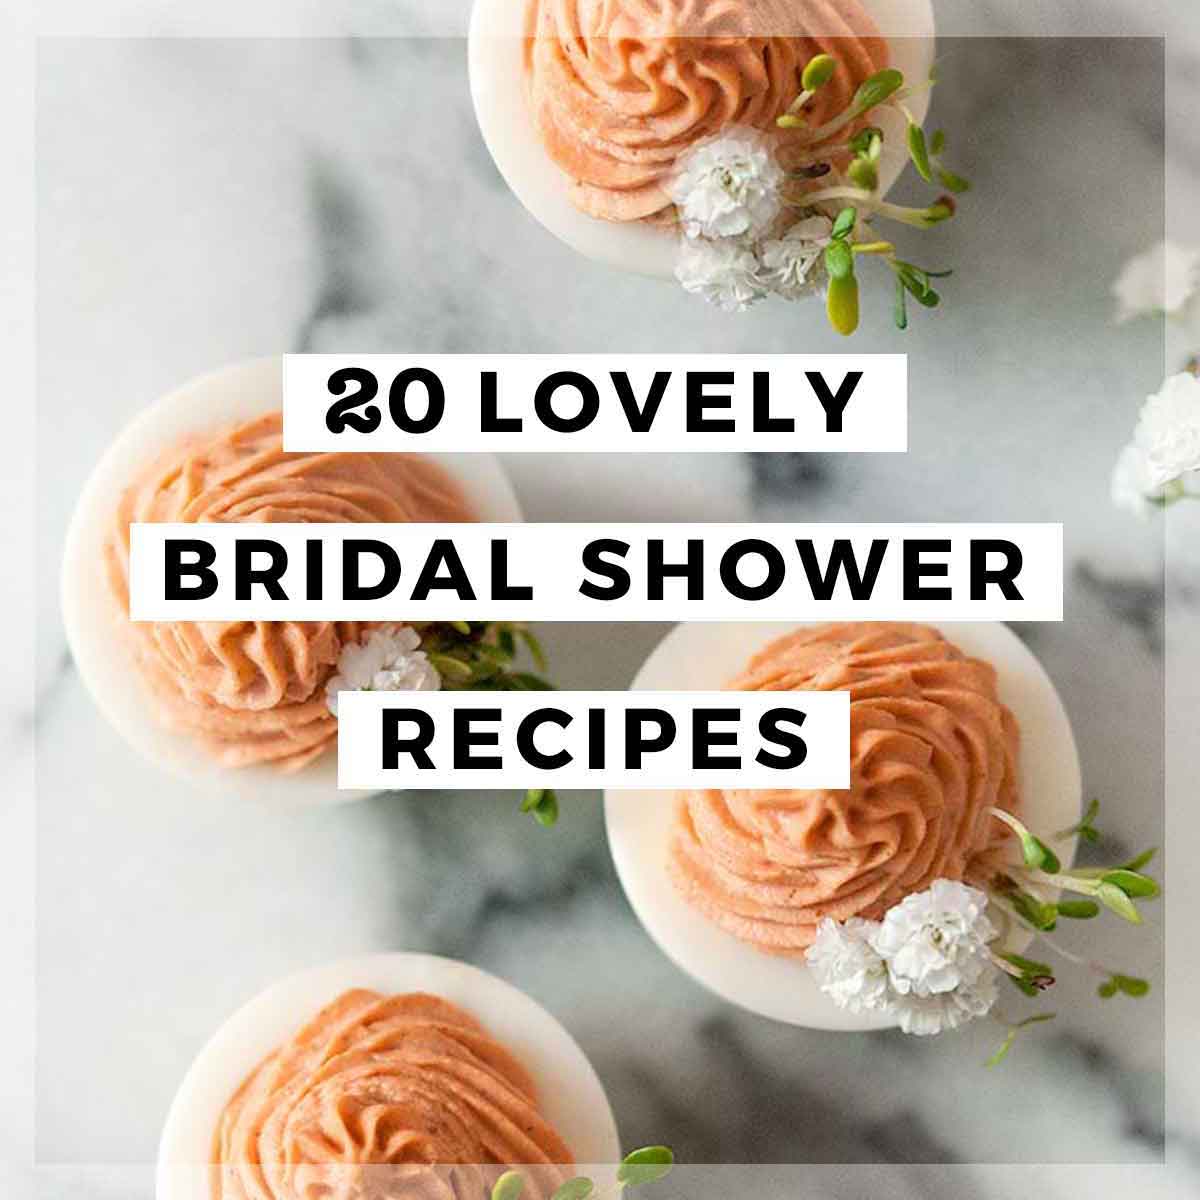 An image of pink deviled eggs with a title that says "20 Lovely Bridal Shower Recipes."